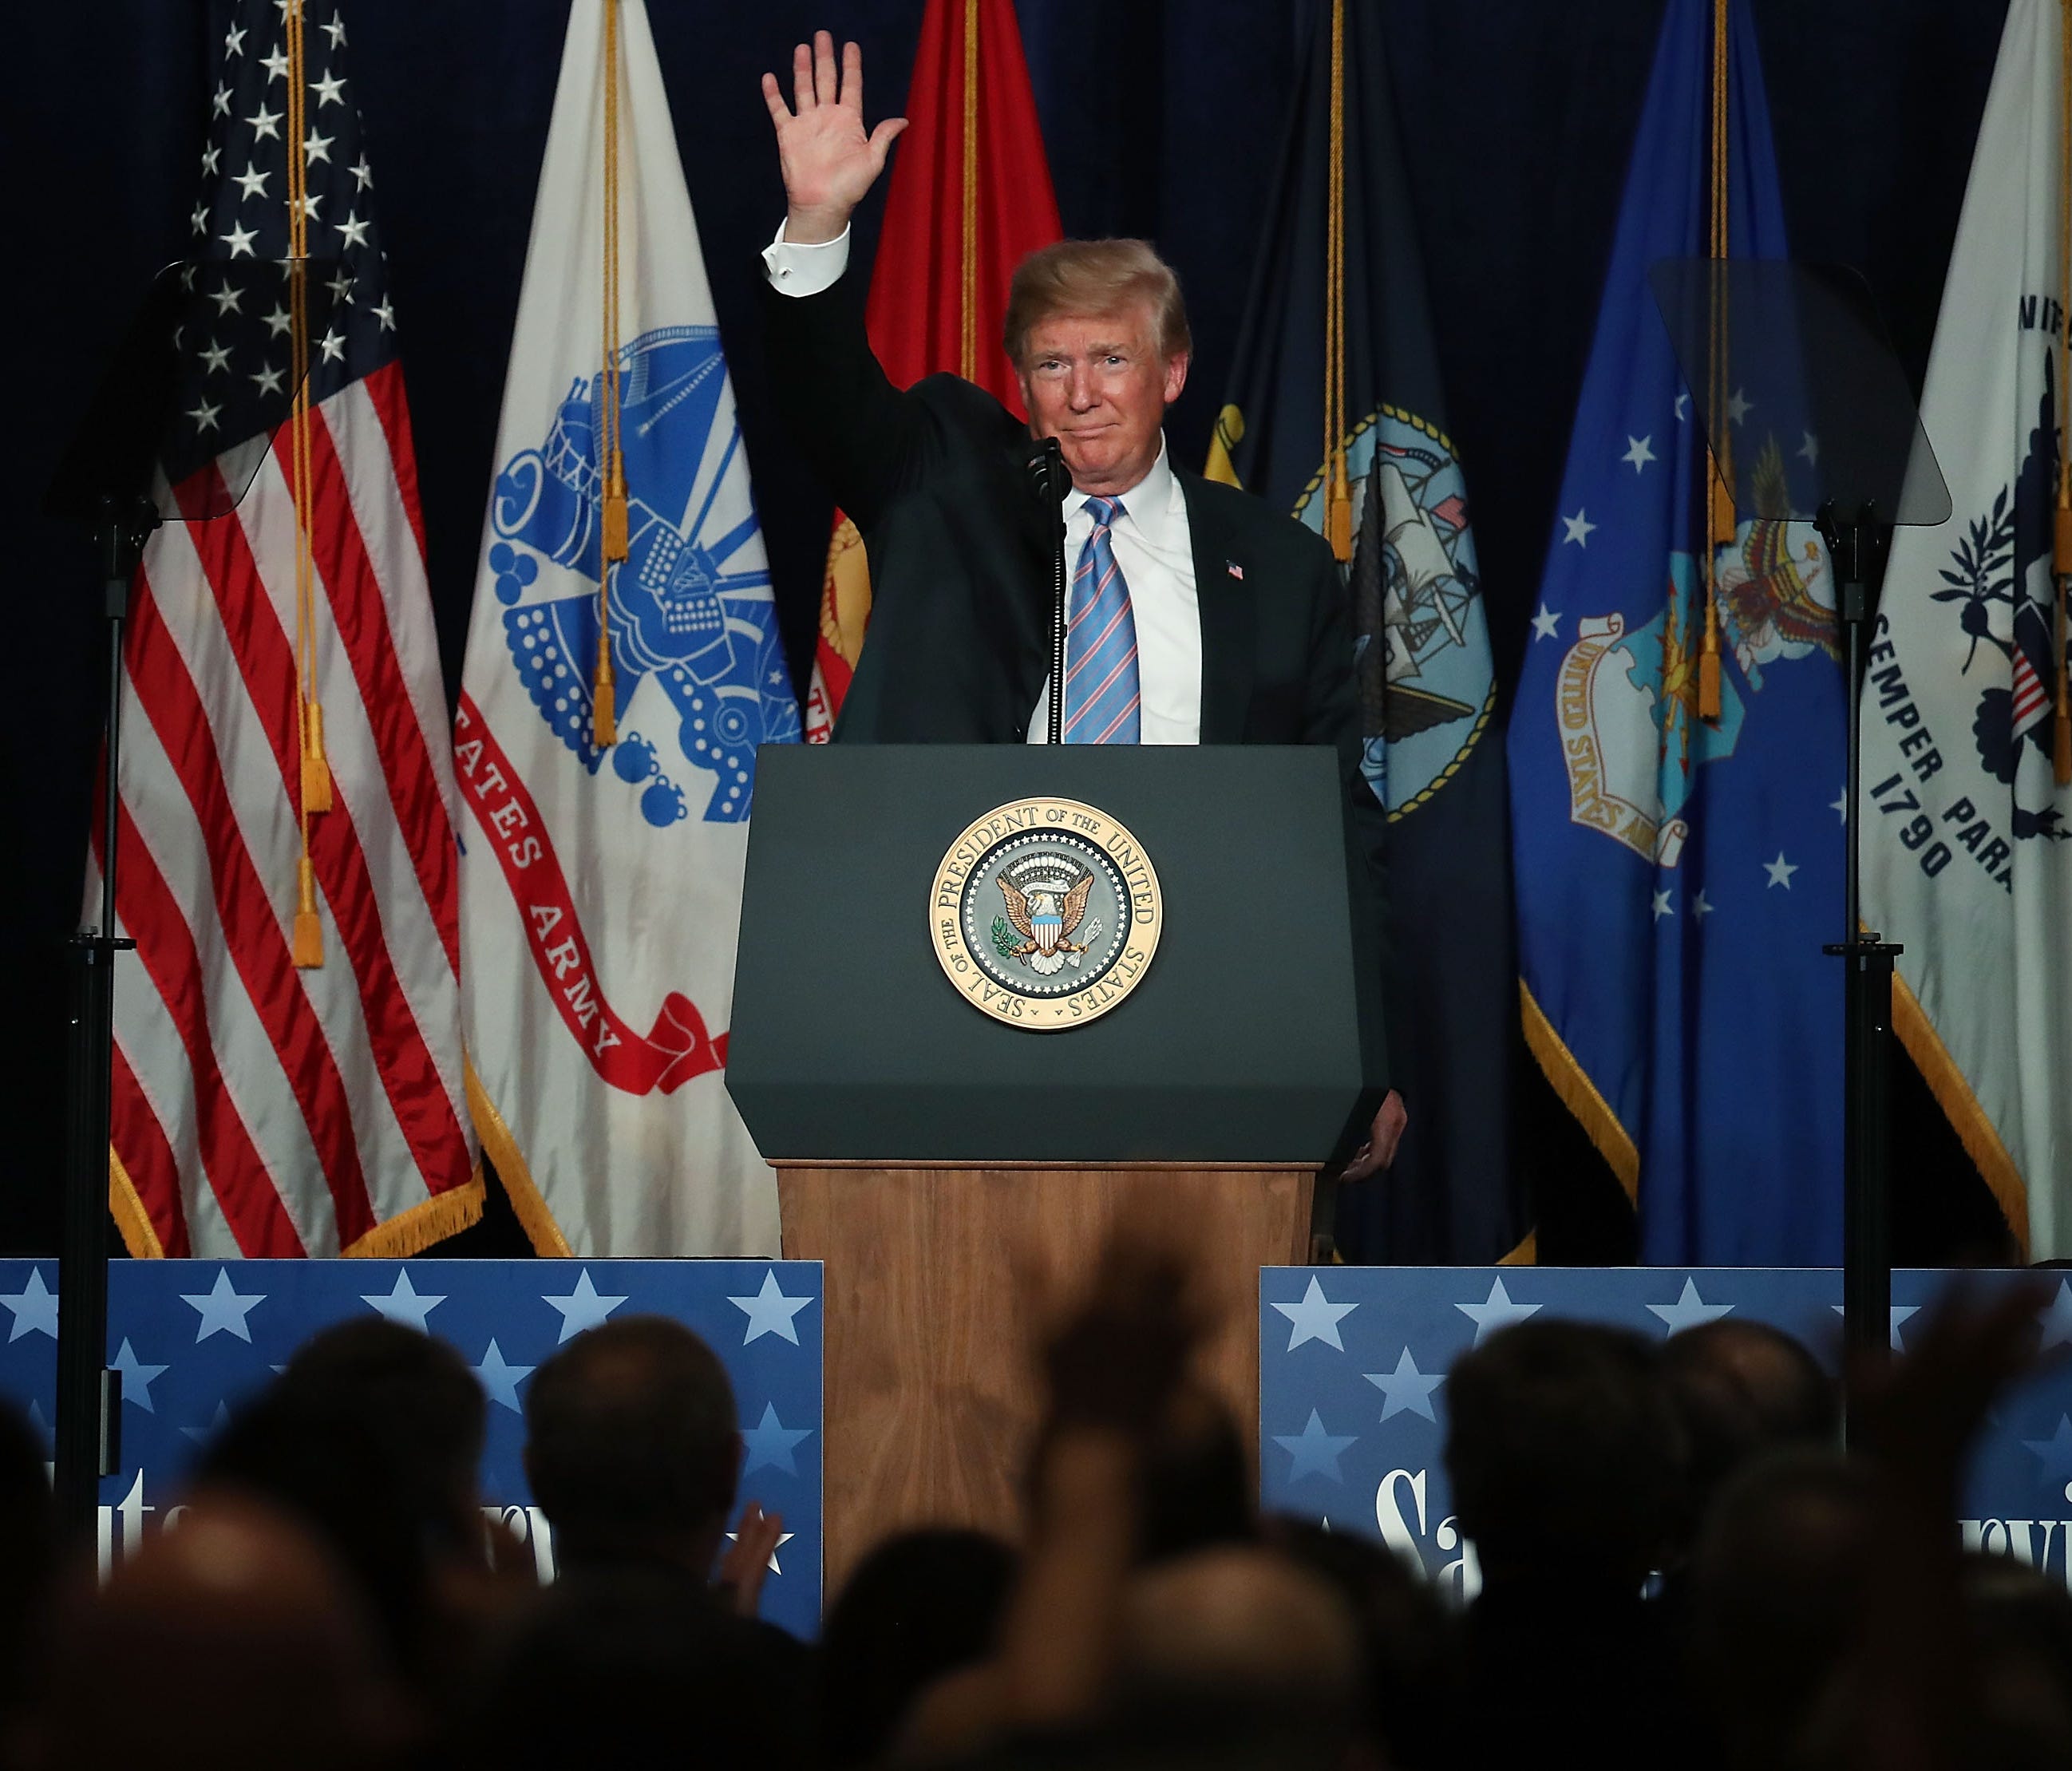 President Donald Trump speaks during a salute to service dinner at the Greenbrier Resort on June 3, 2018 in White Sulphur Springs, West Virginia. The president was participating in a military tribute on the eve of Independence Day.